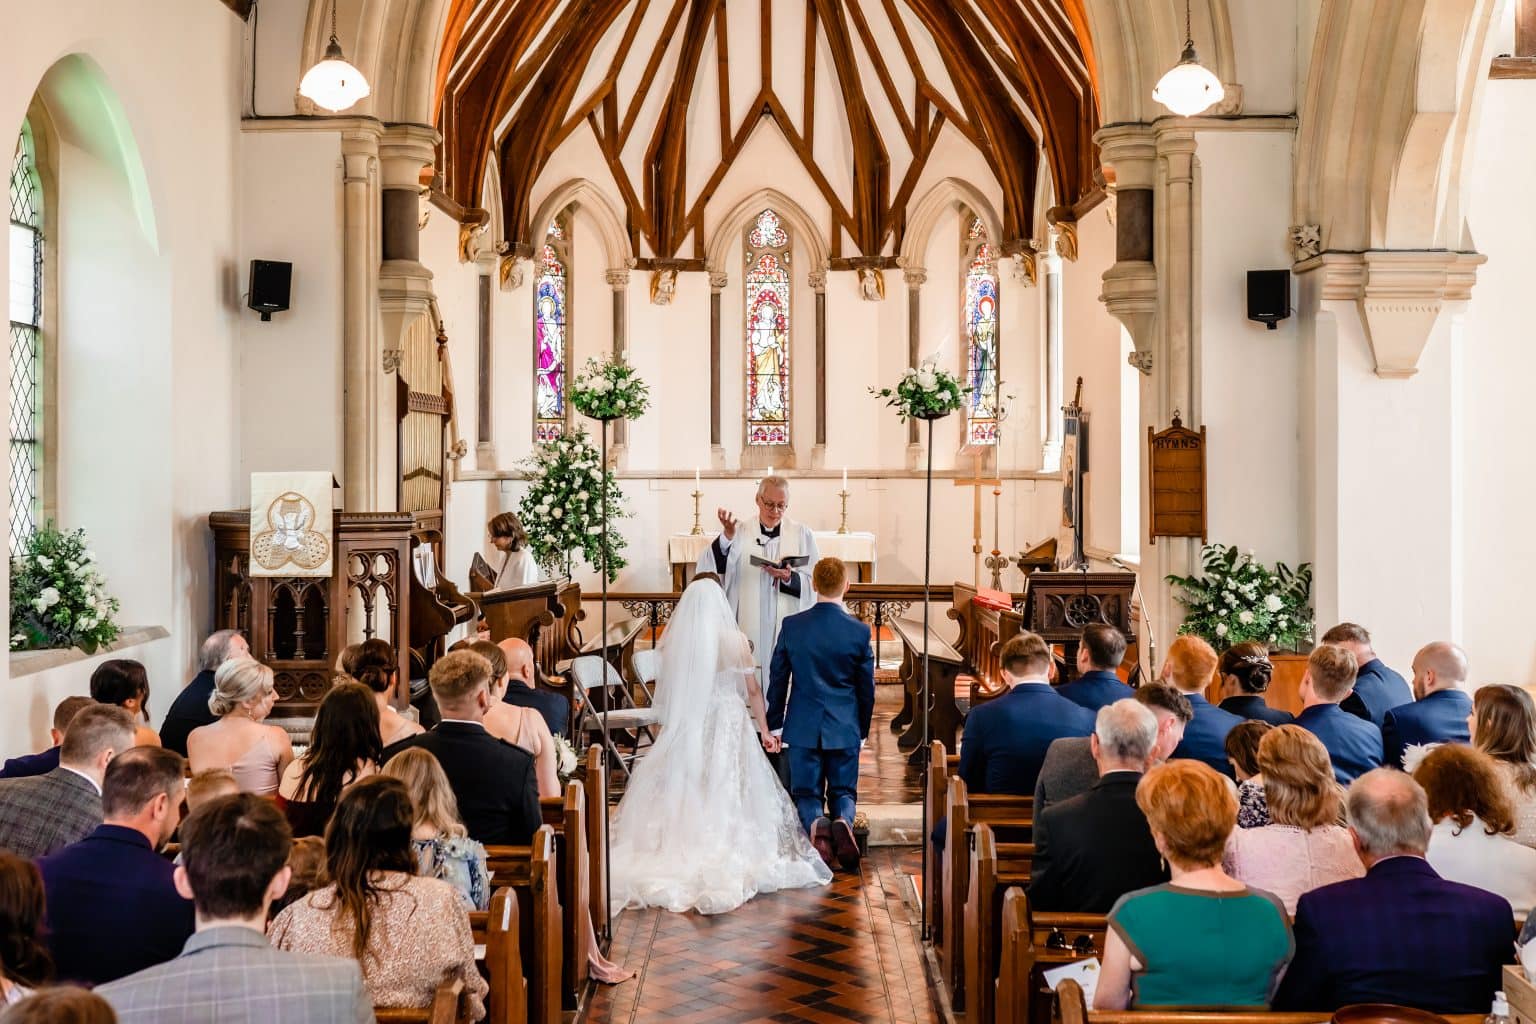 Couple kneeling during ceremony at Christ Church, Gretton